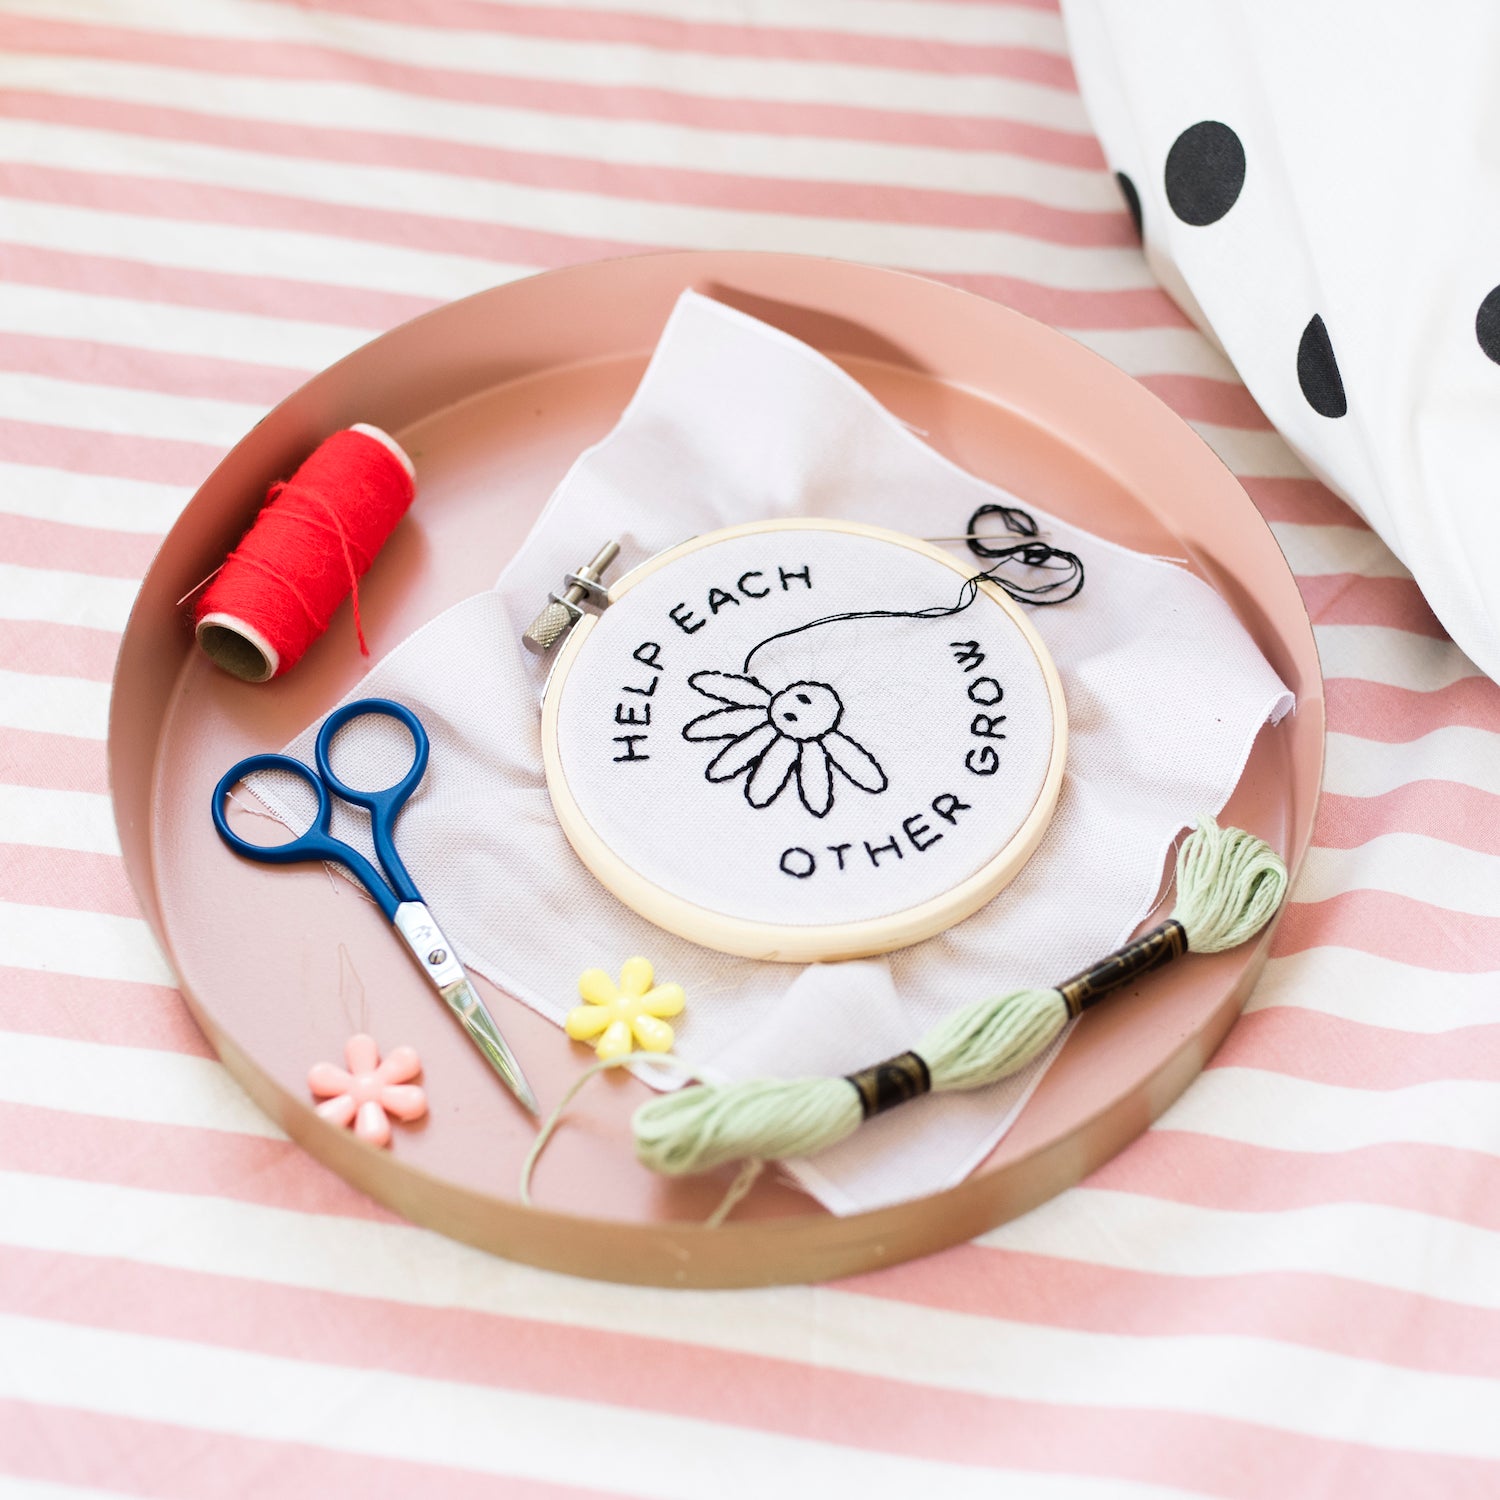 Setting Up An Embroidery Kit — Life in the Little